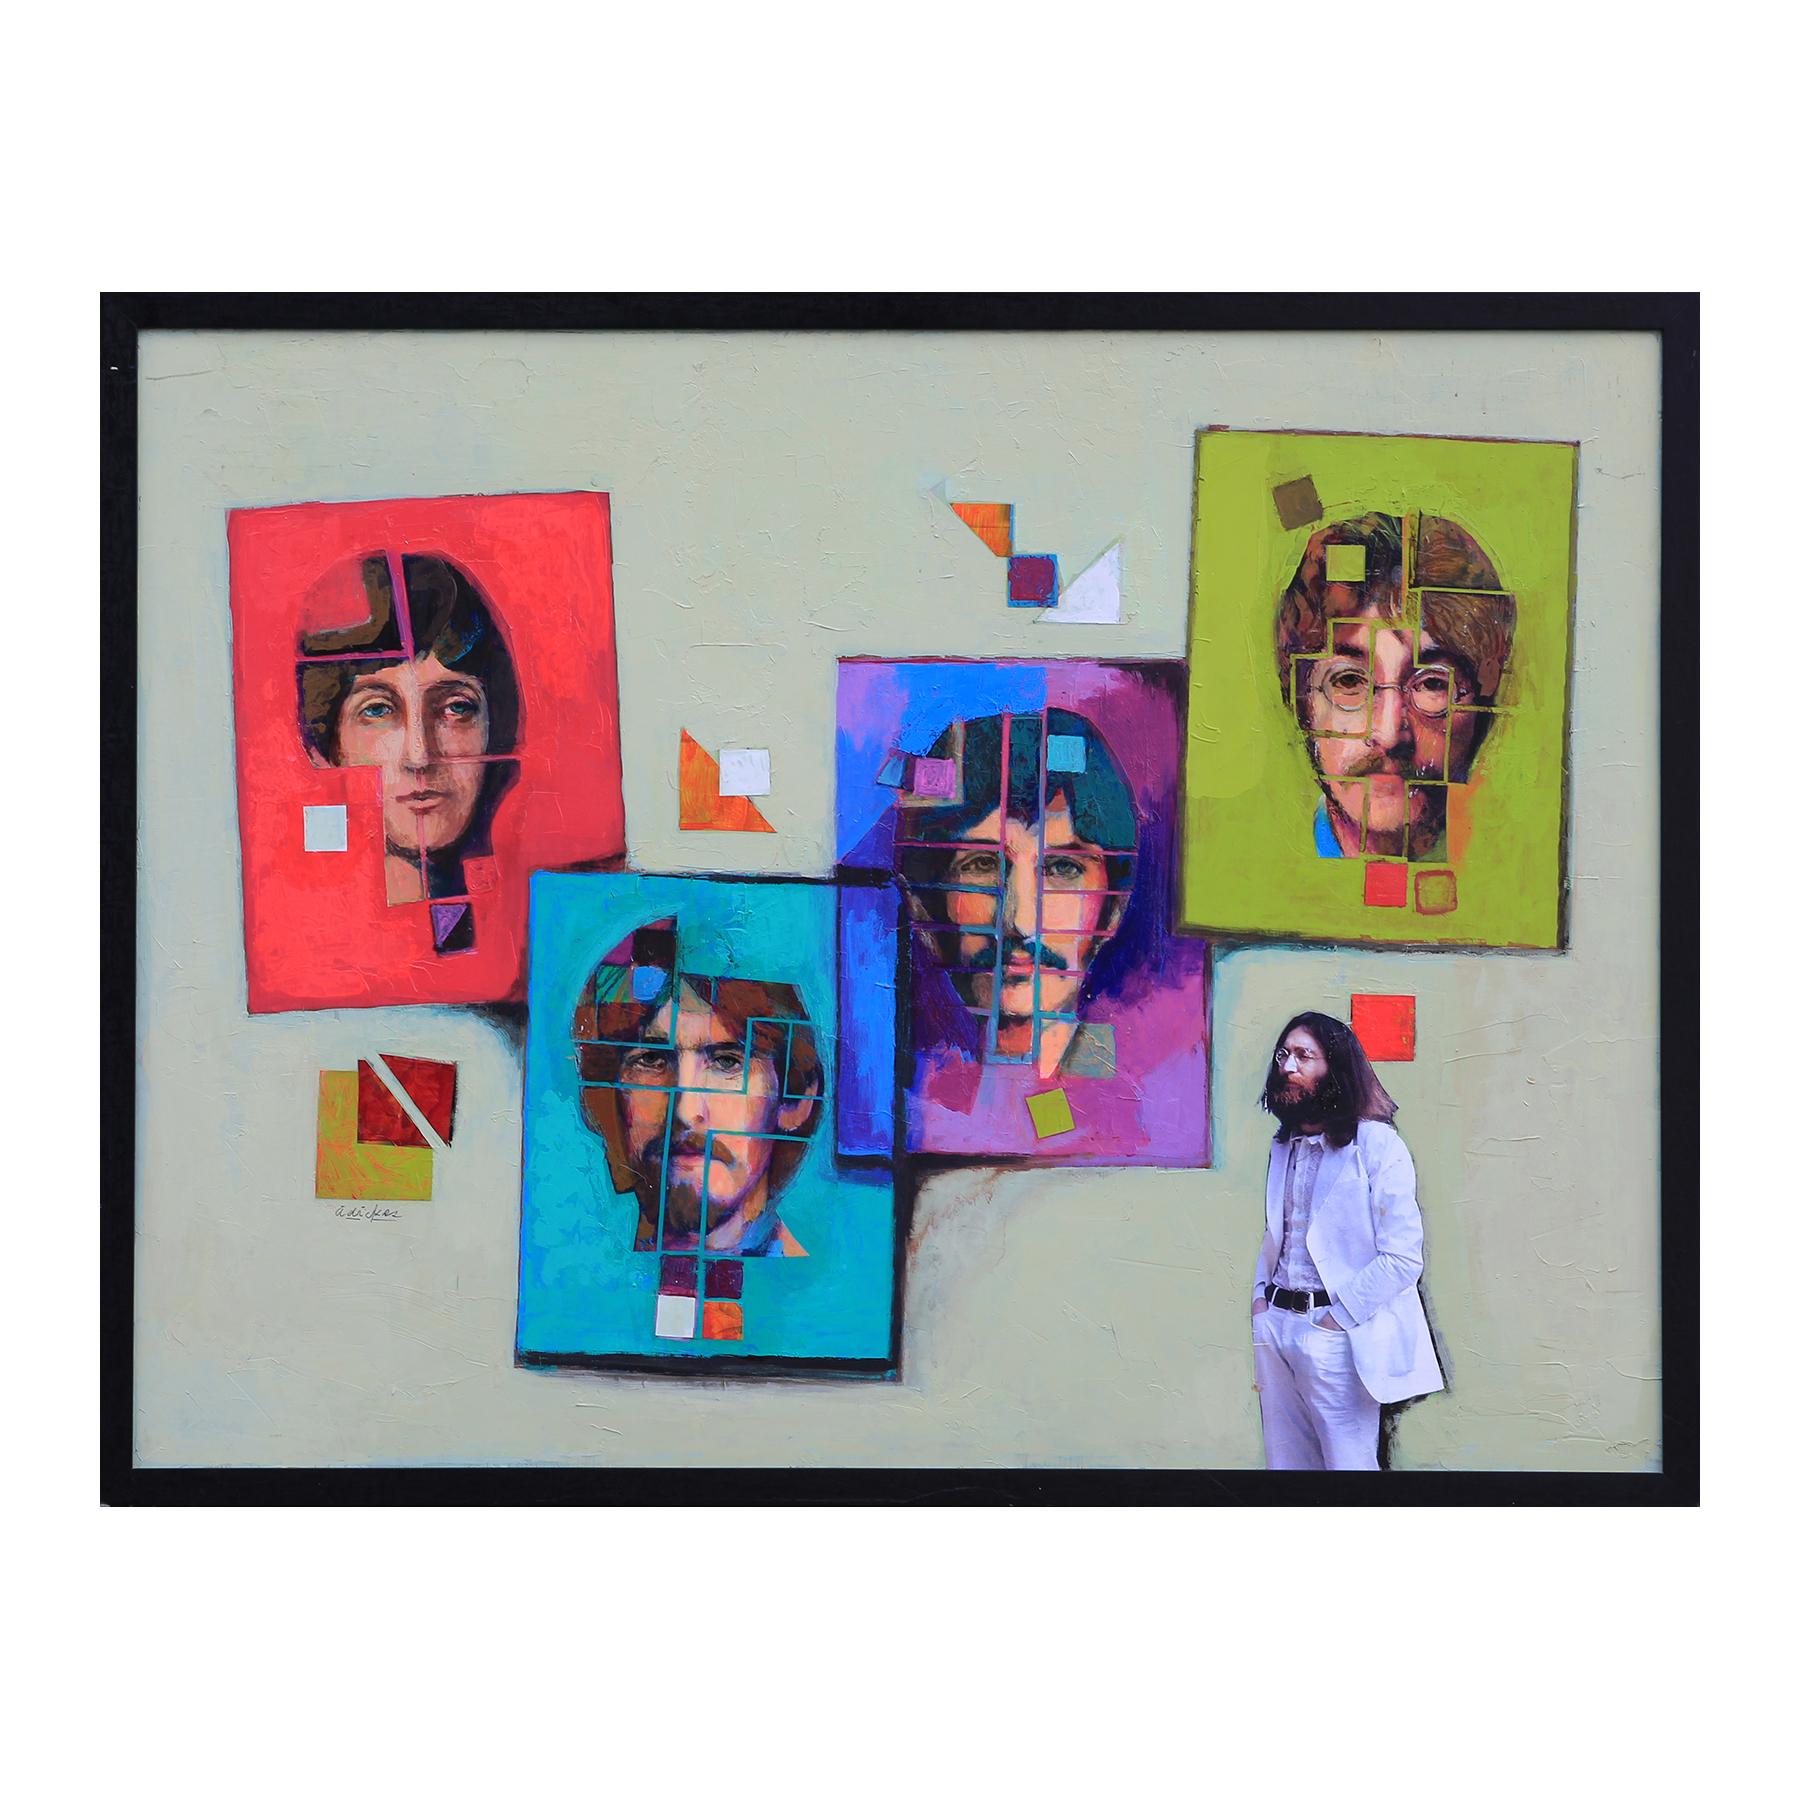 Colorful Abstract Modern Original Beatles Portrait Painting with Collage  - Mixed Media Art by David Adickes